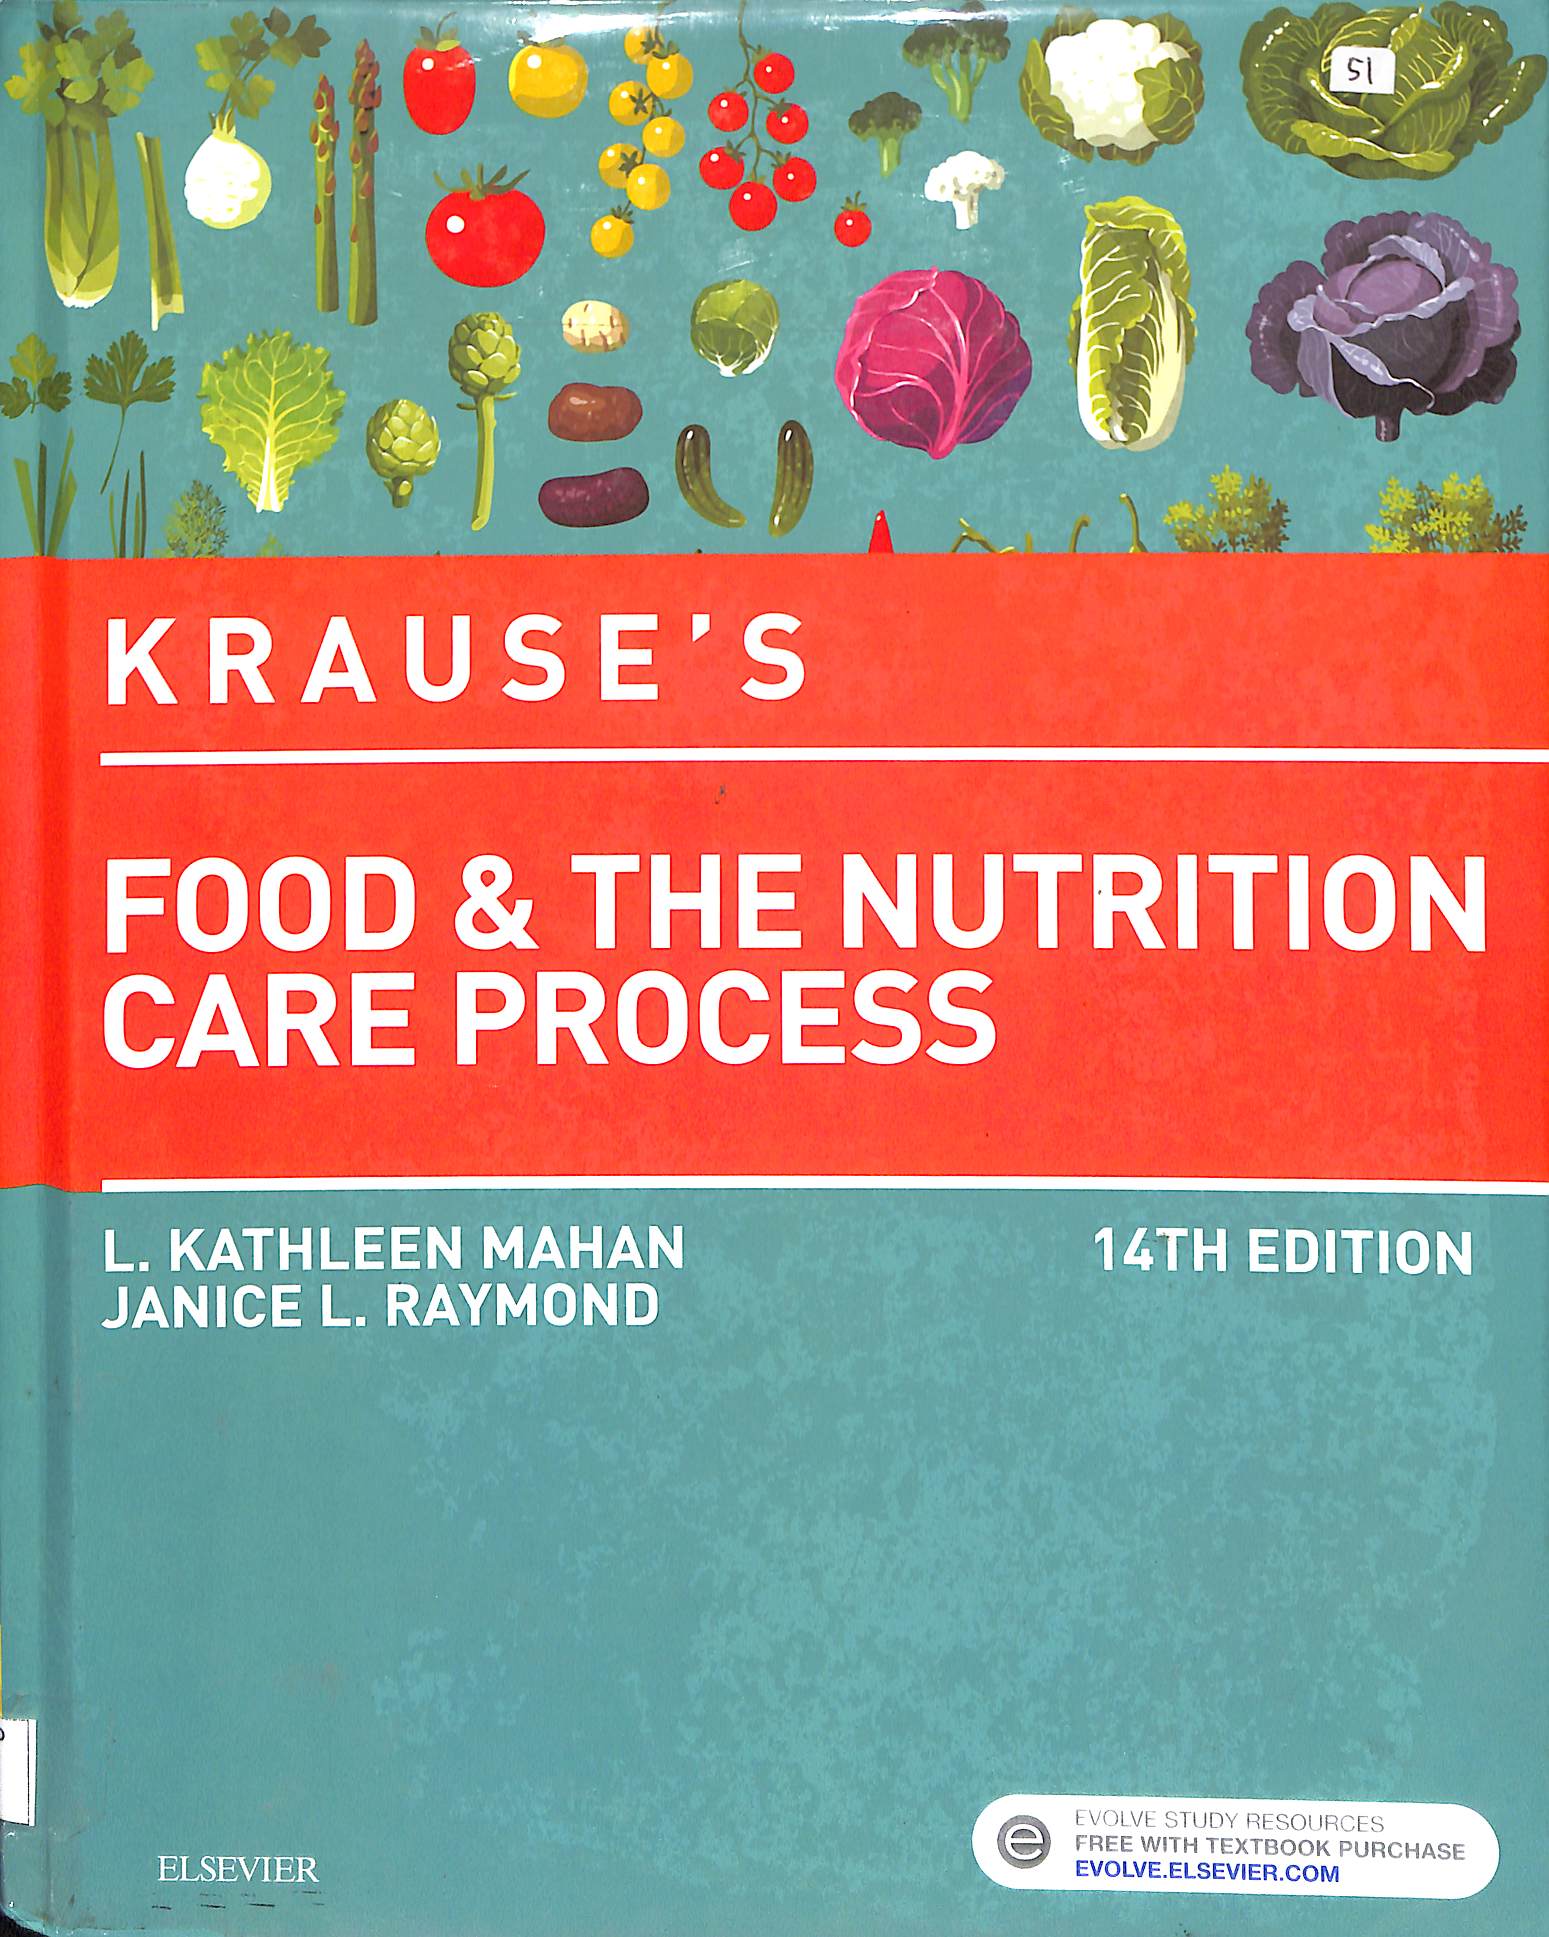 Krauses food & the nutrition care process 14 th edition